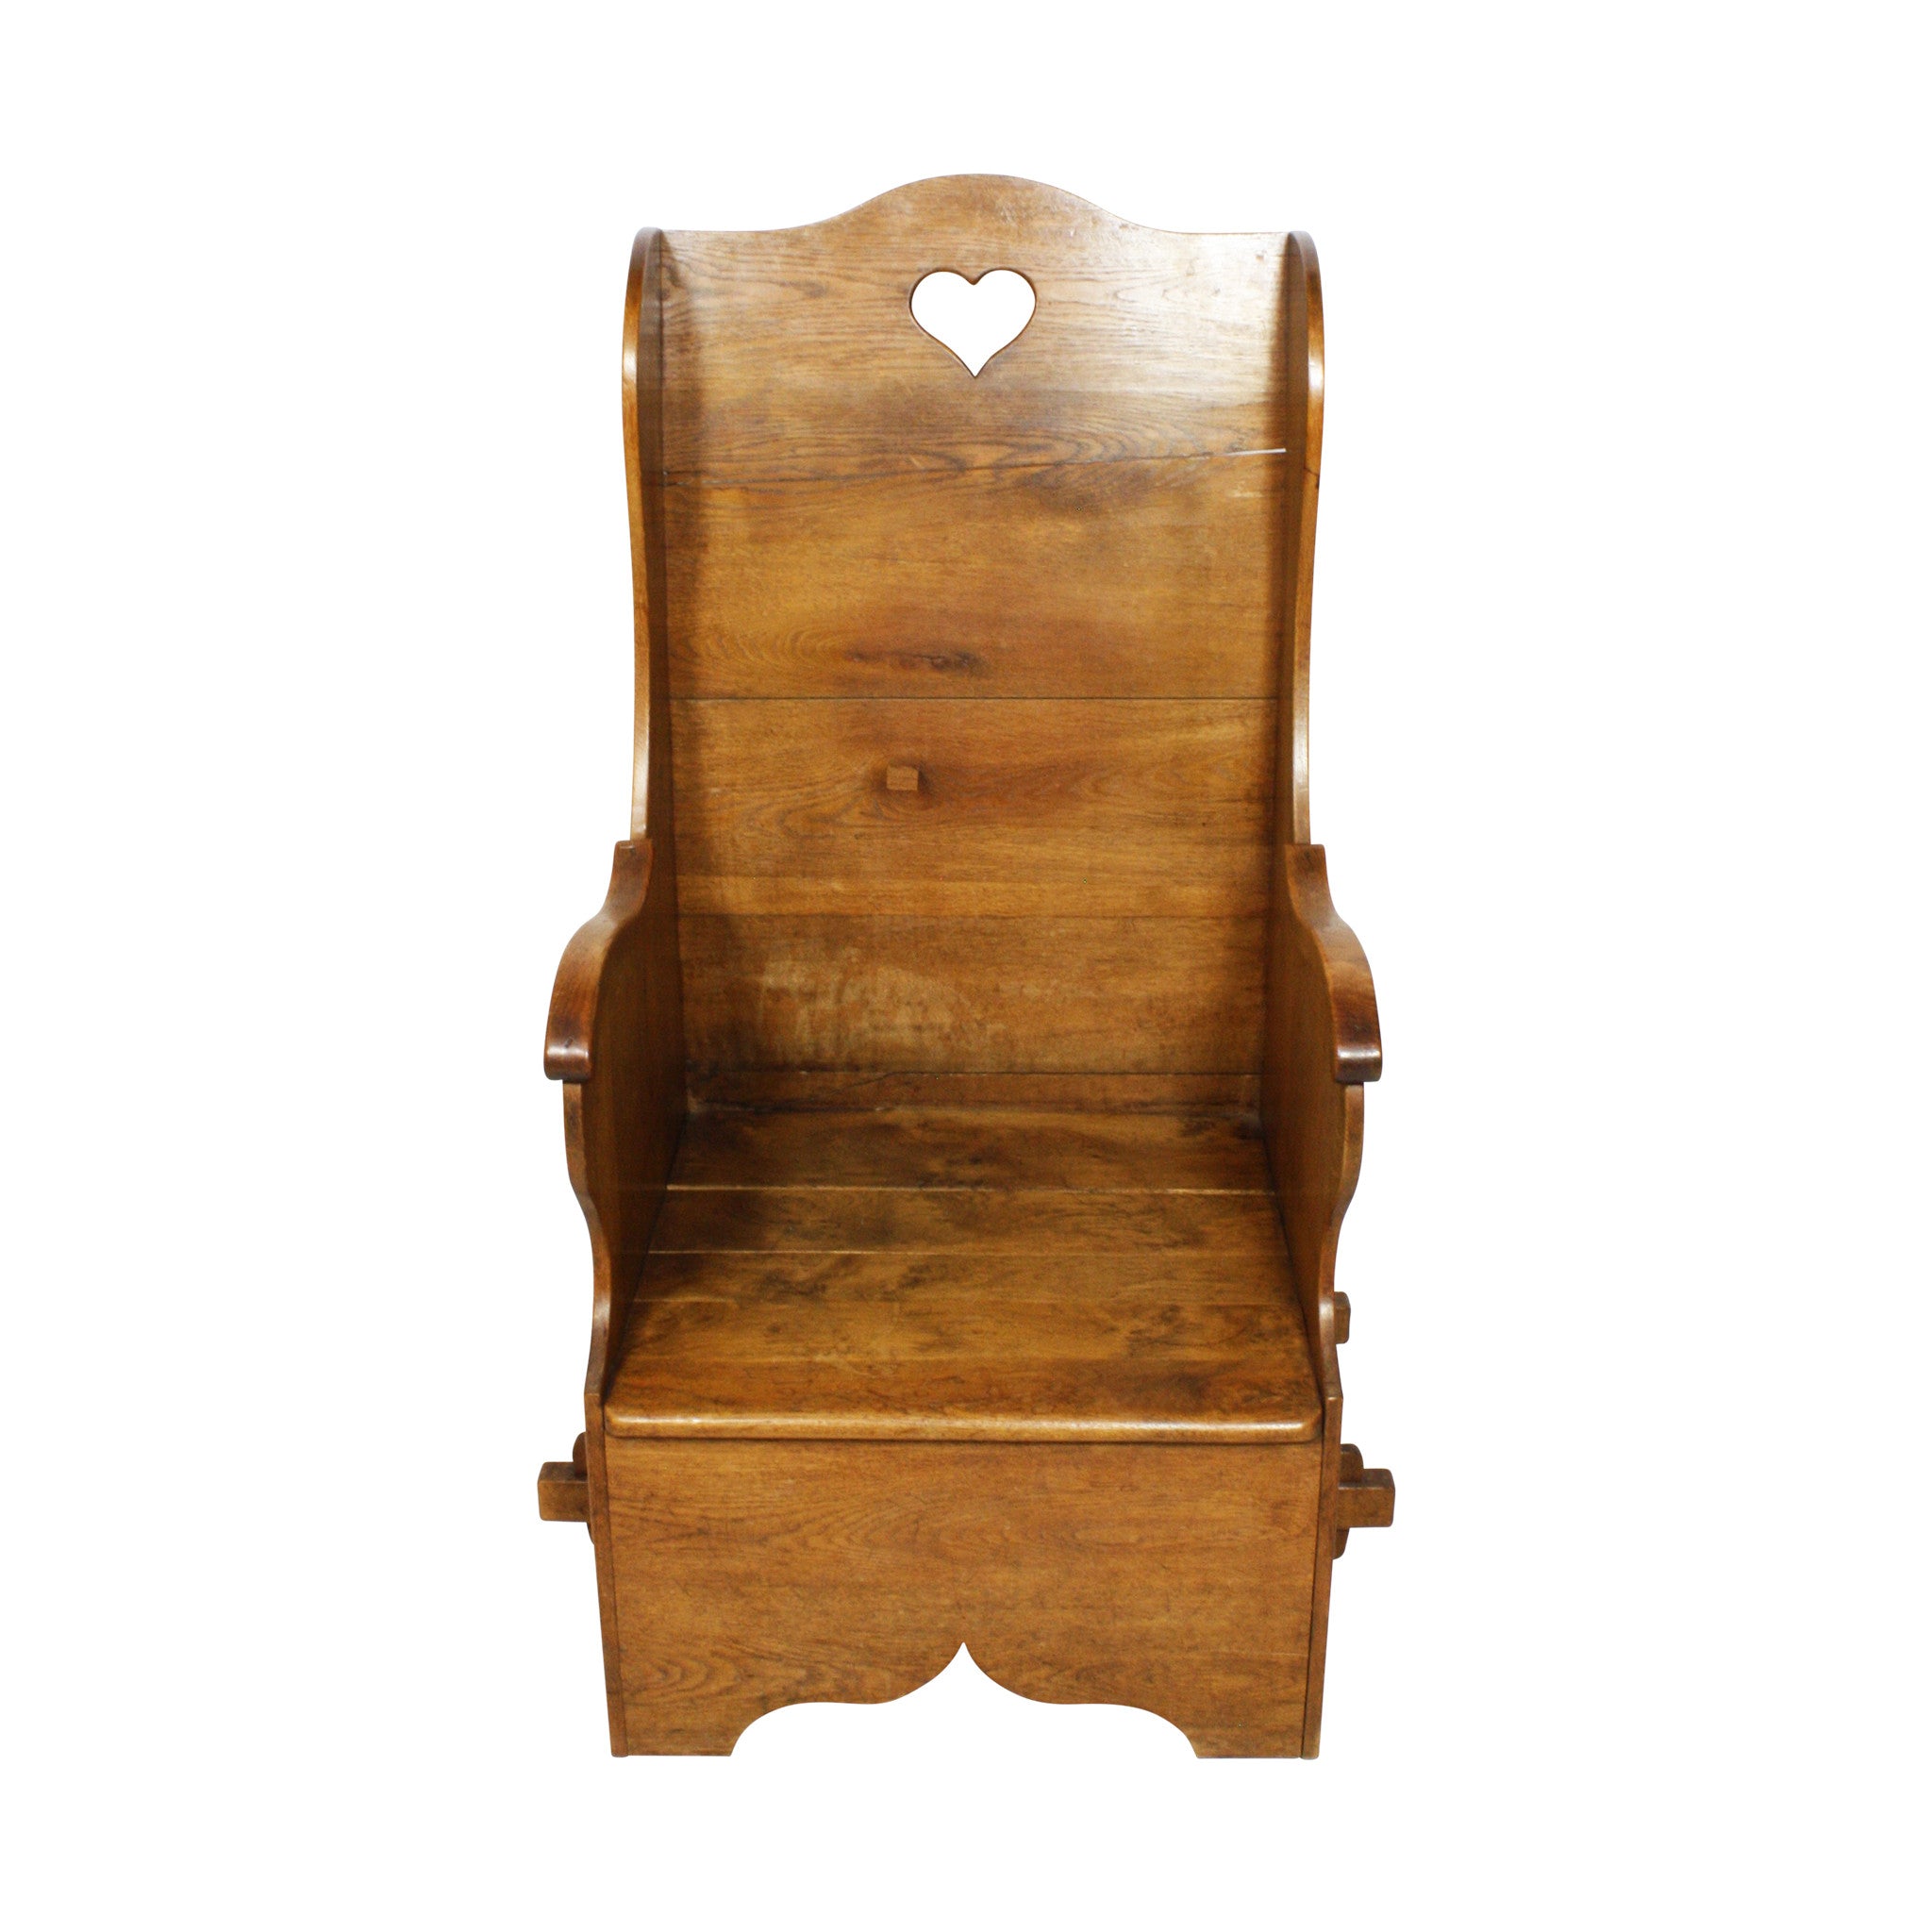 ski-country-antiques - English Oak Highback Chair with Heart